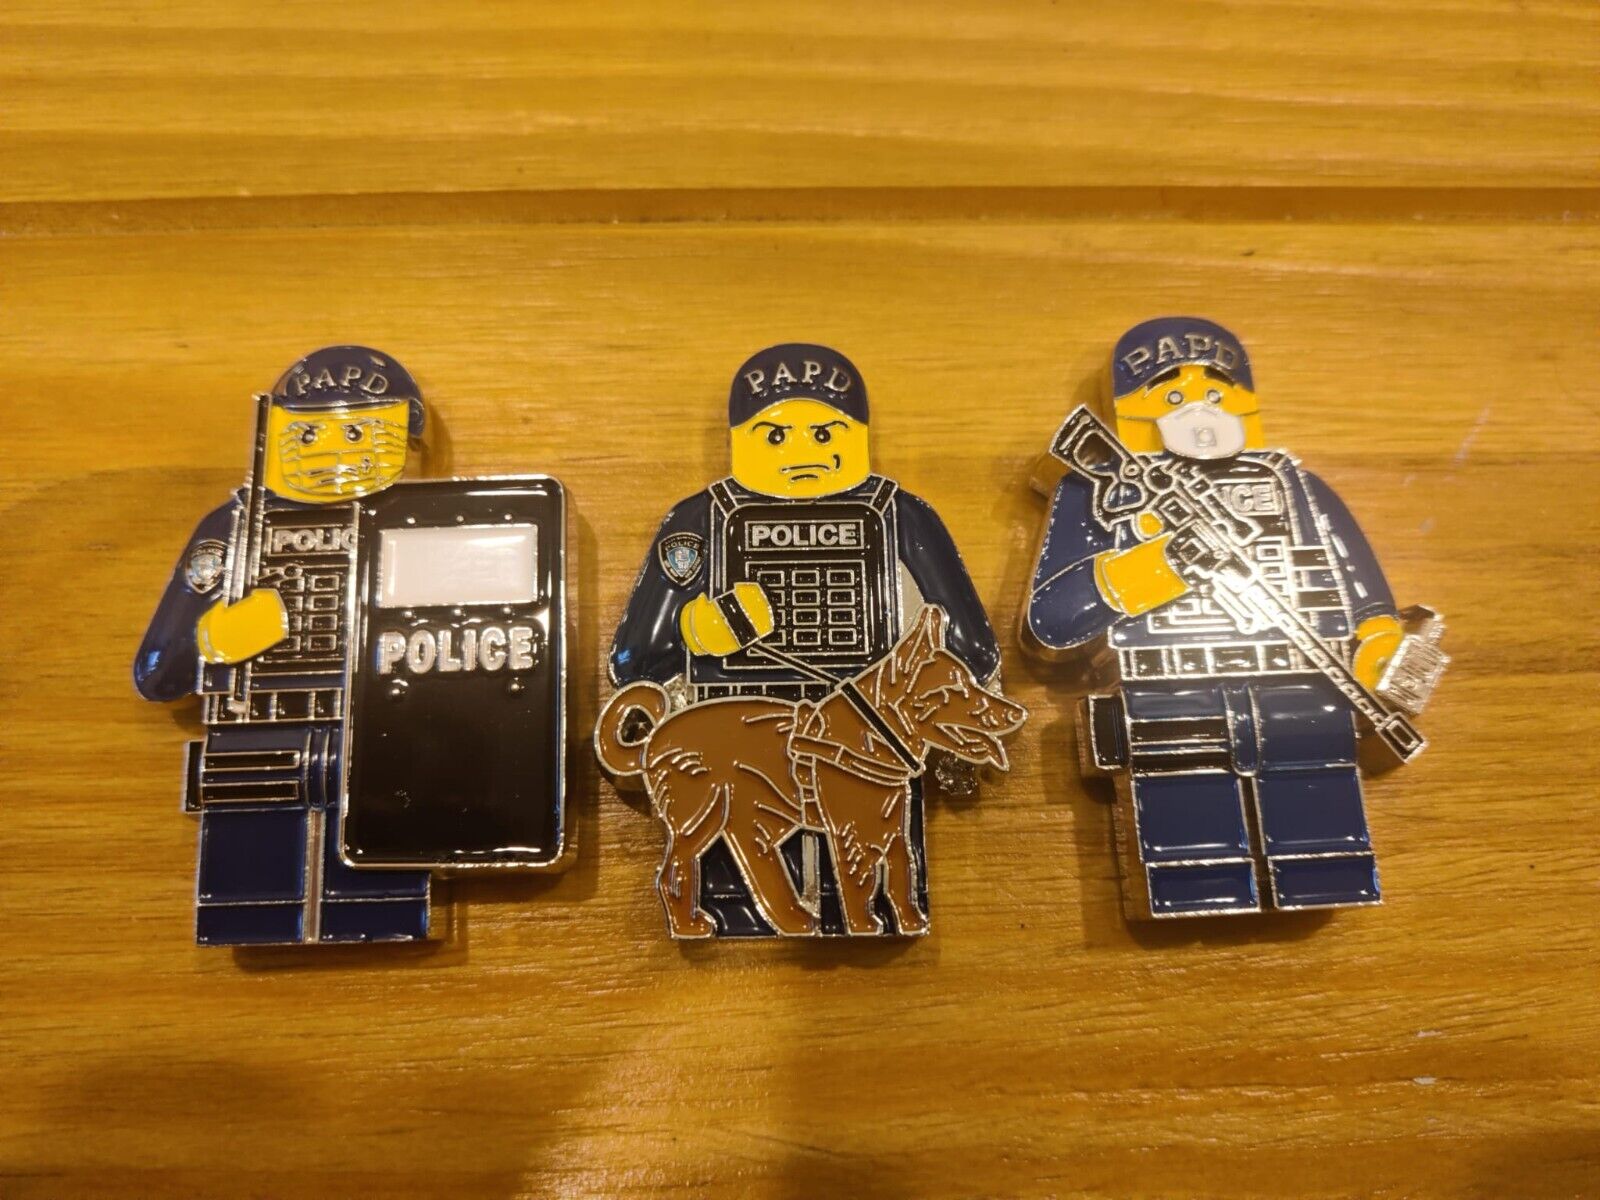  Port Authority Police Department Lego Set (Riot, K9, Covid)